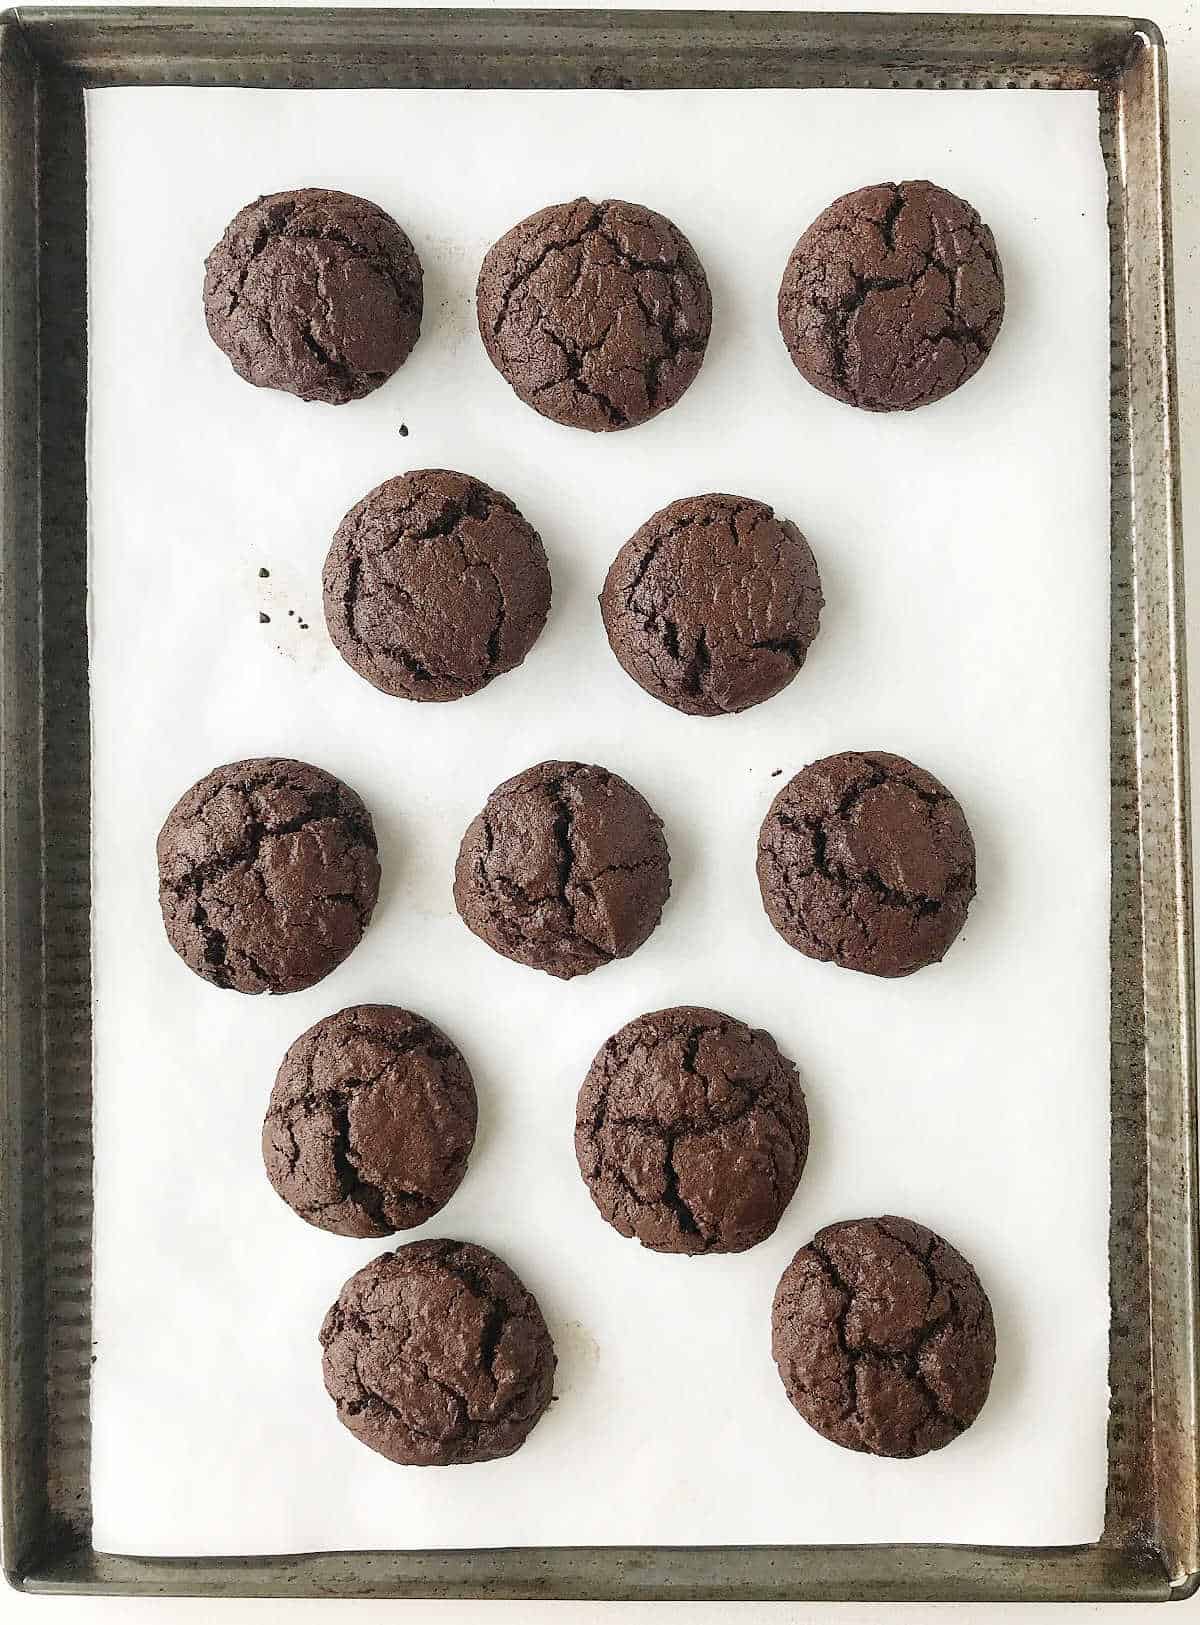 Parchment paper on cookie sheet with baked chocolate whoopie pies.